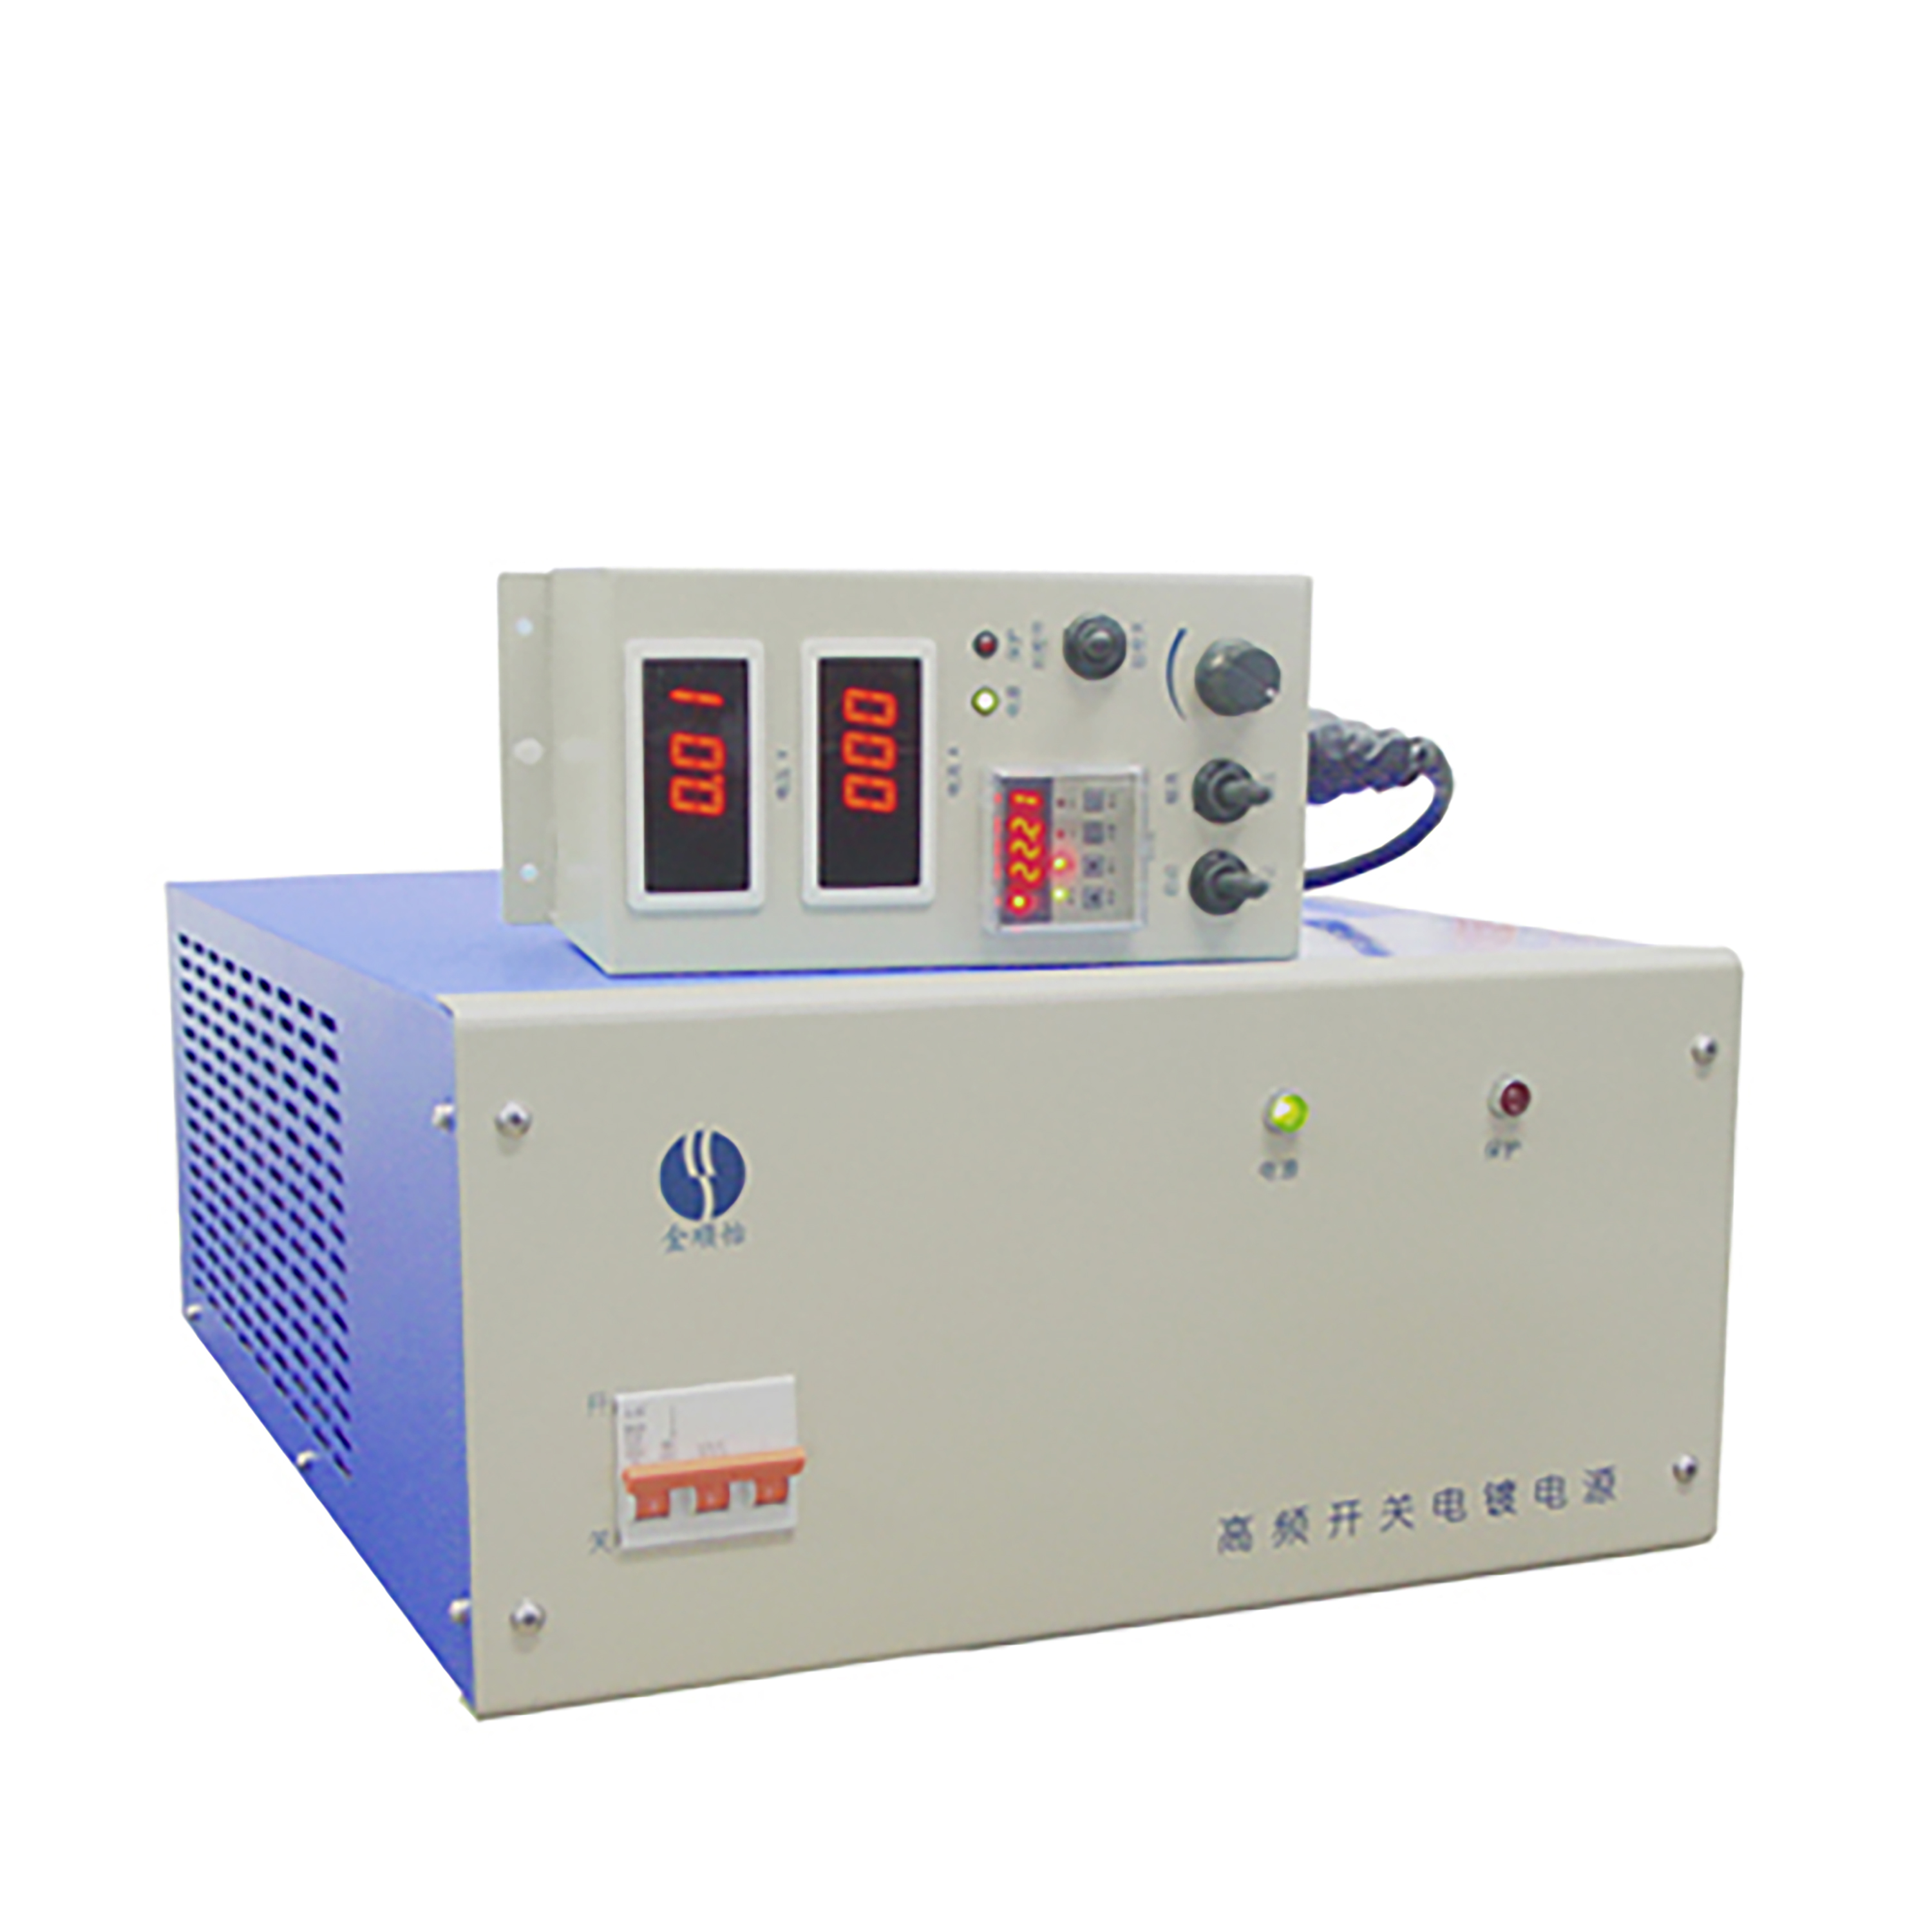  Air cooled DC rectifiers 60A-250V